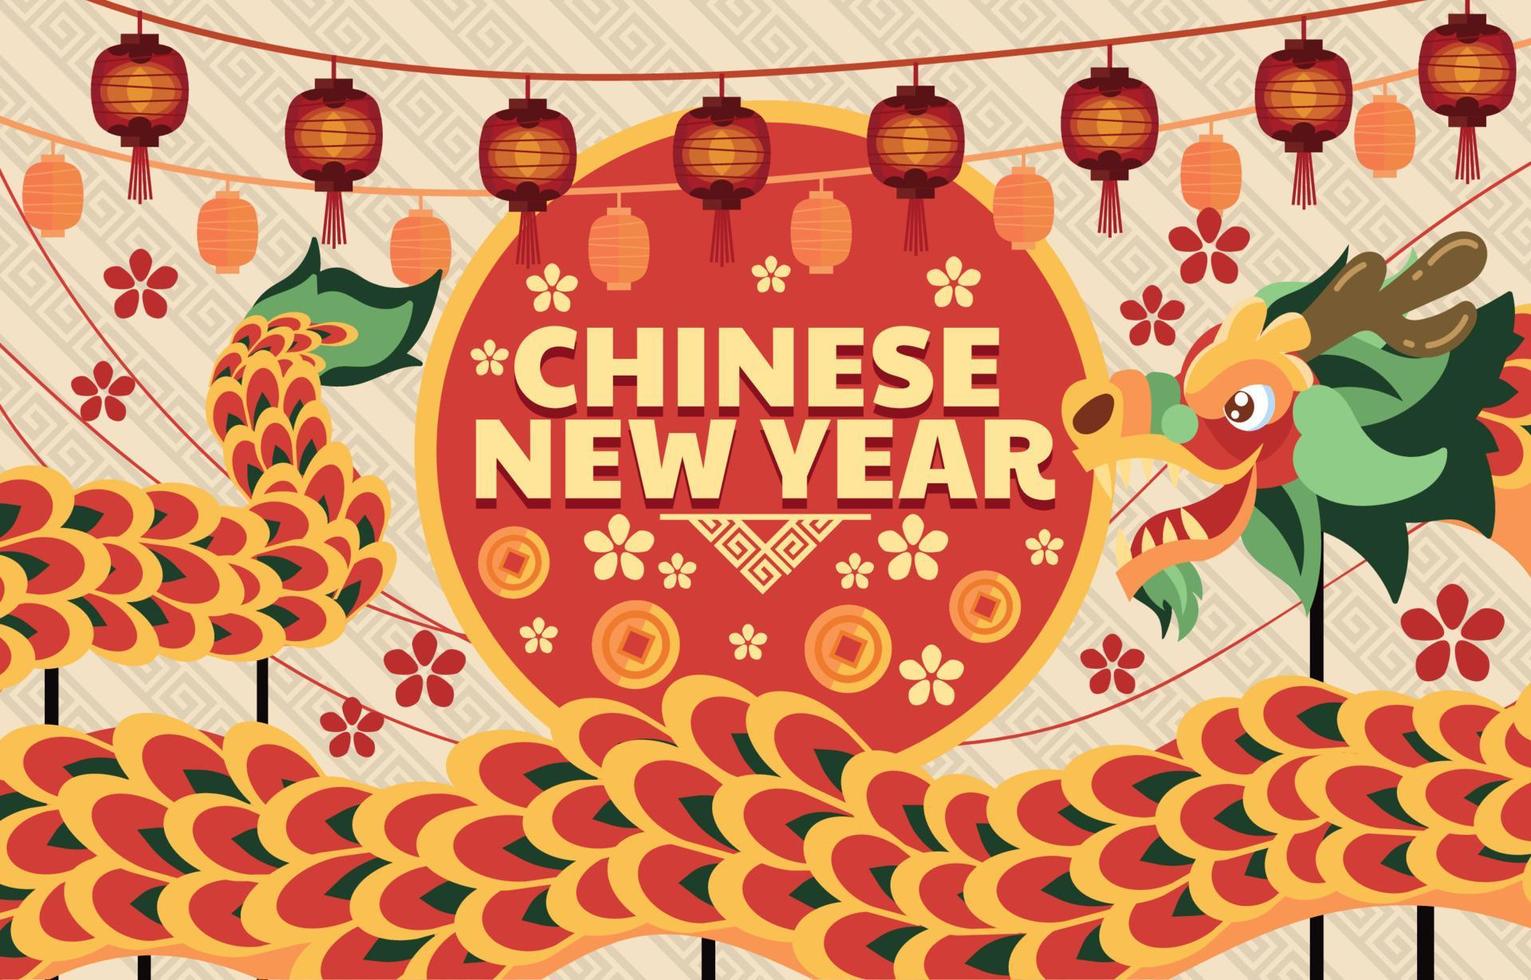 Dragon of Chinese New Year Festival vector